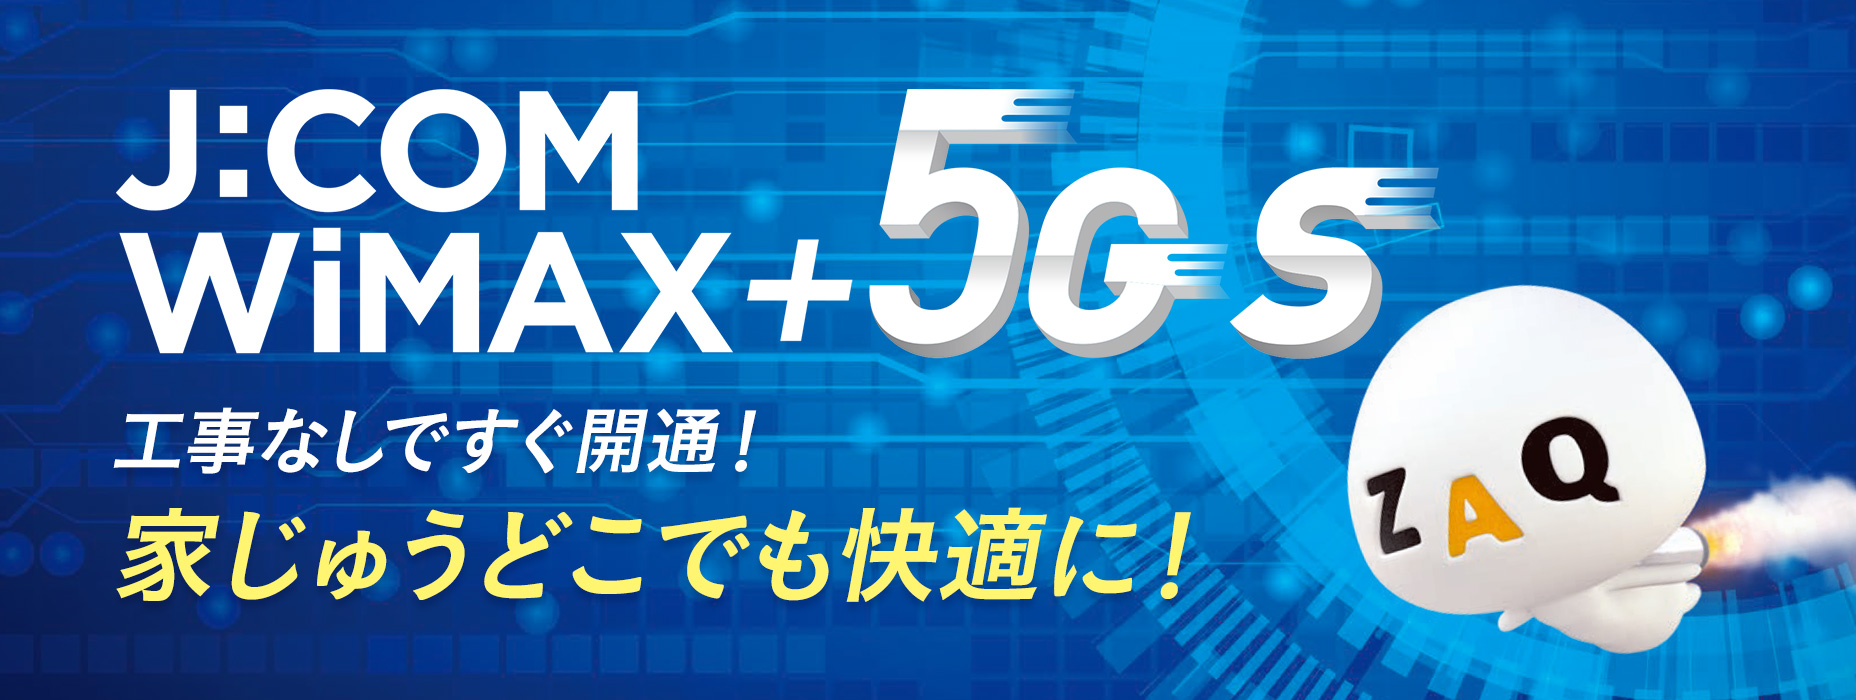 J:COM WiMAX +5G S Open immediately without any construction work Comfortable anywhere in the house